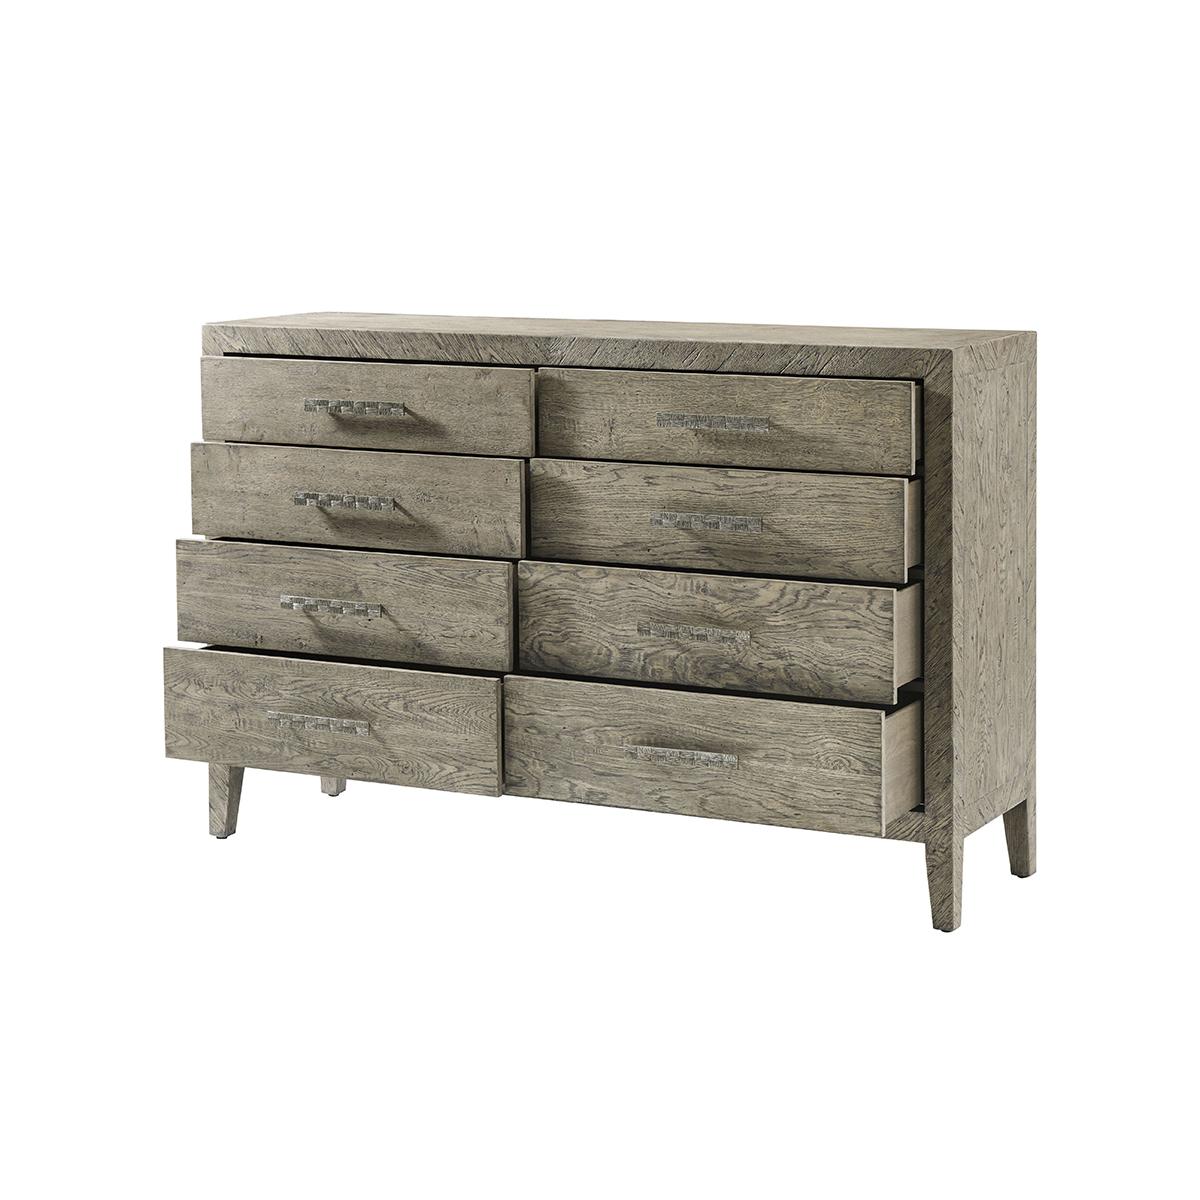 Vietnamese Greyed Southern Rustic Dresser For Sale